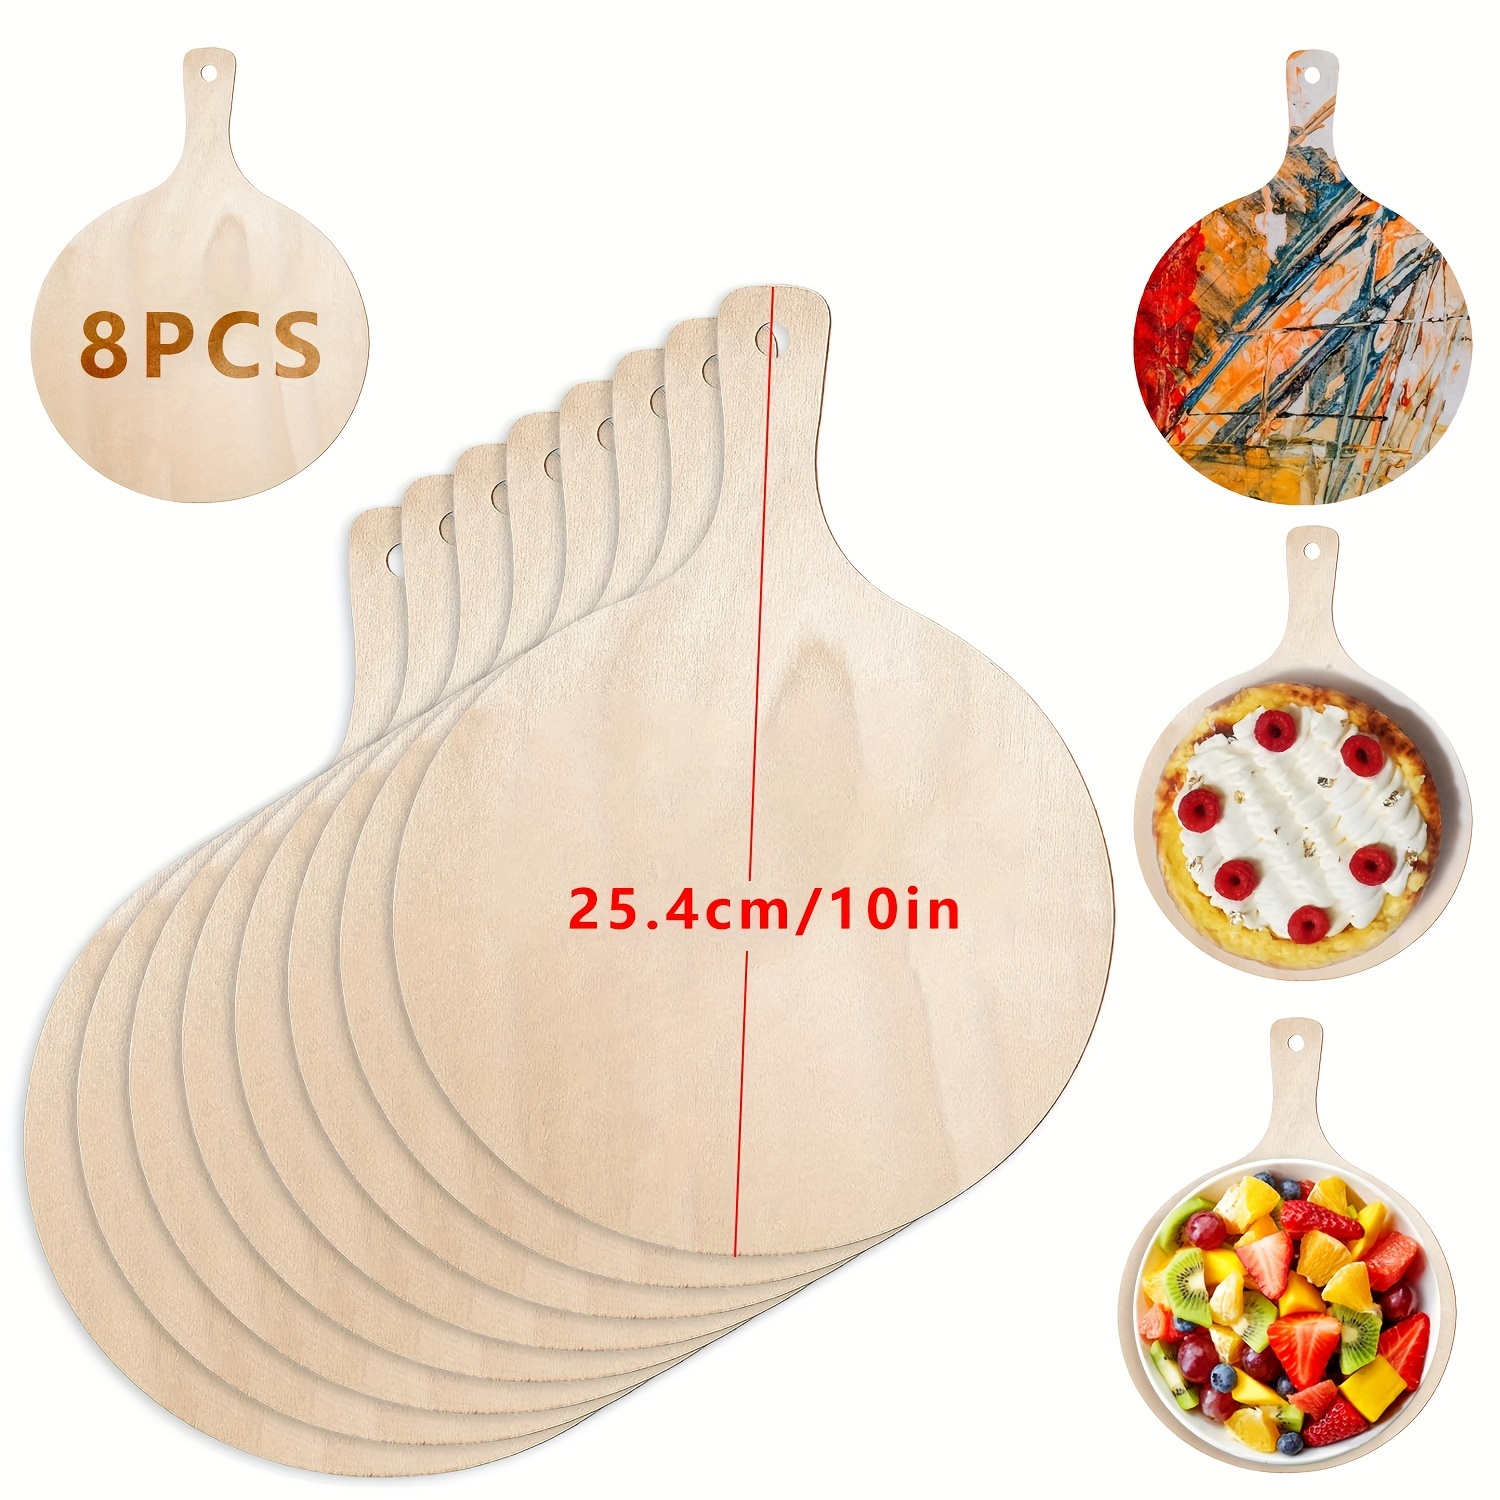  12” Light Solid Wood Round Pizza Cutting Board - Chopping Wood  Pad Beechwood Cutting Board - Round Wooden Board Charcuterie - Mini Small  Breadboard for Kitchen - Bread Cheese Serving Platters: Home & Kitchen